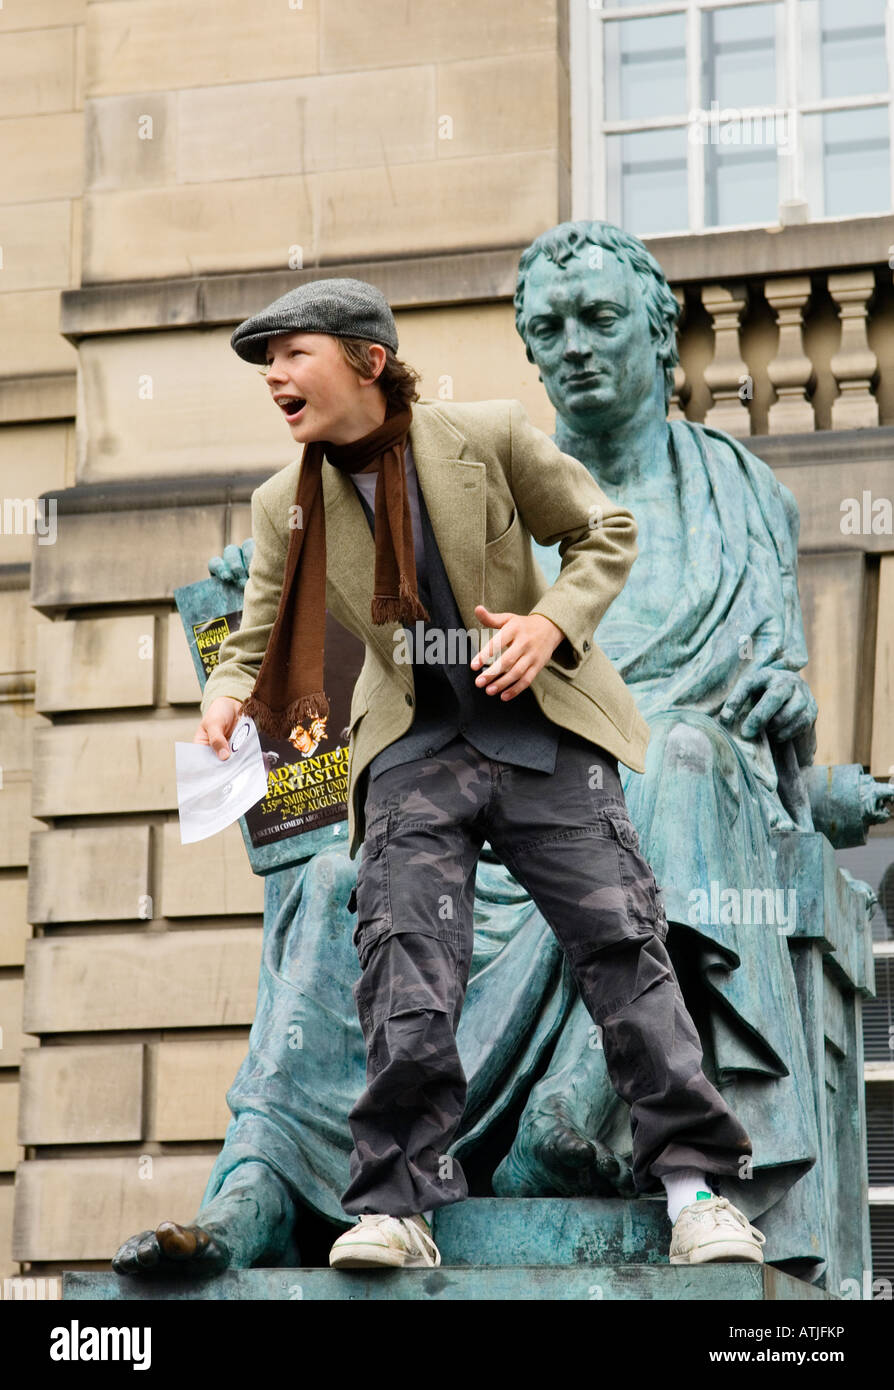 Edinburgh Festival Fringe, Scotland. Street performer promotes evening shows from Victorian statue in the High Street Stock Photo